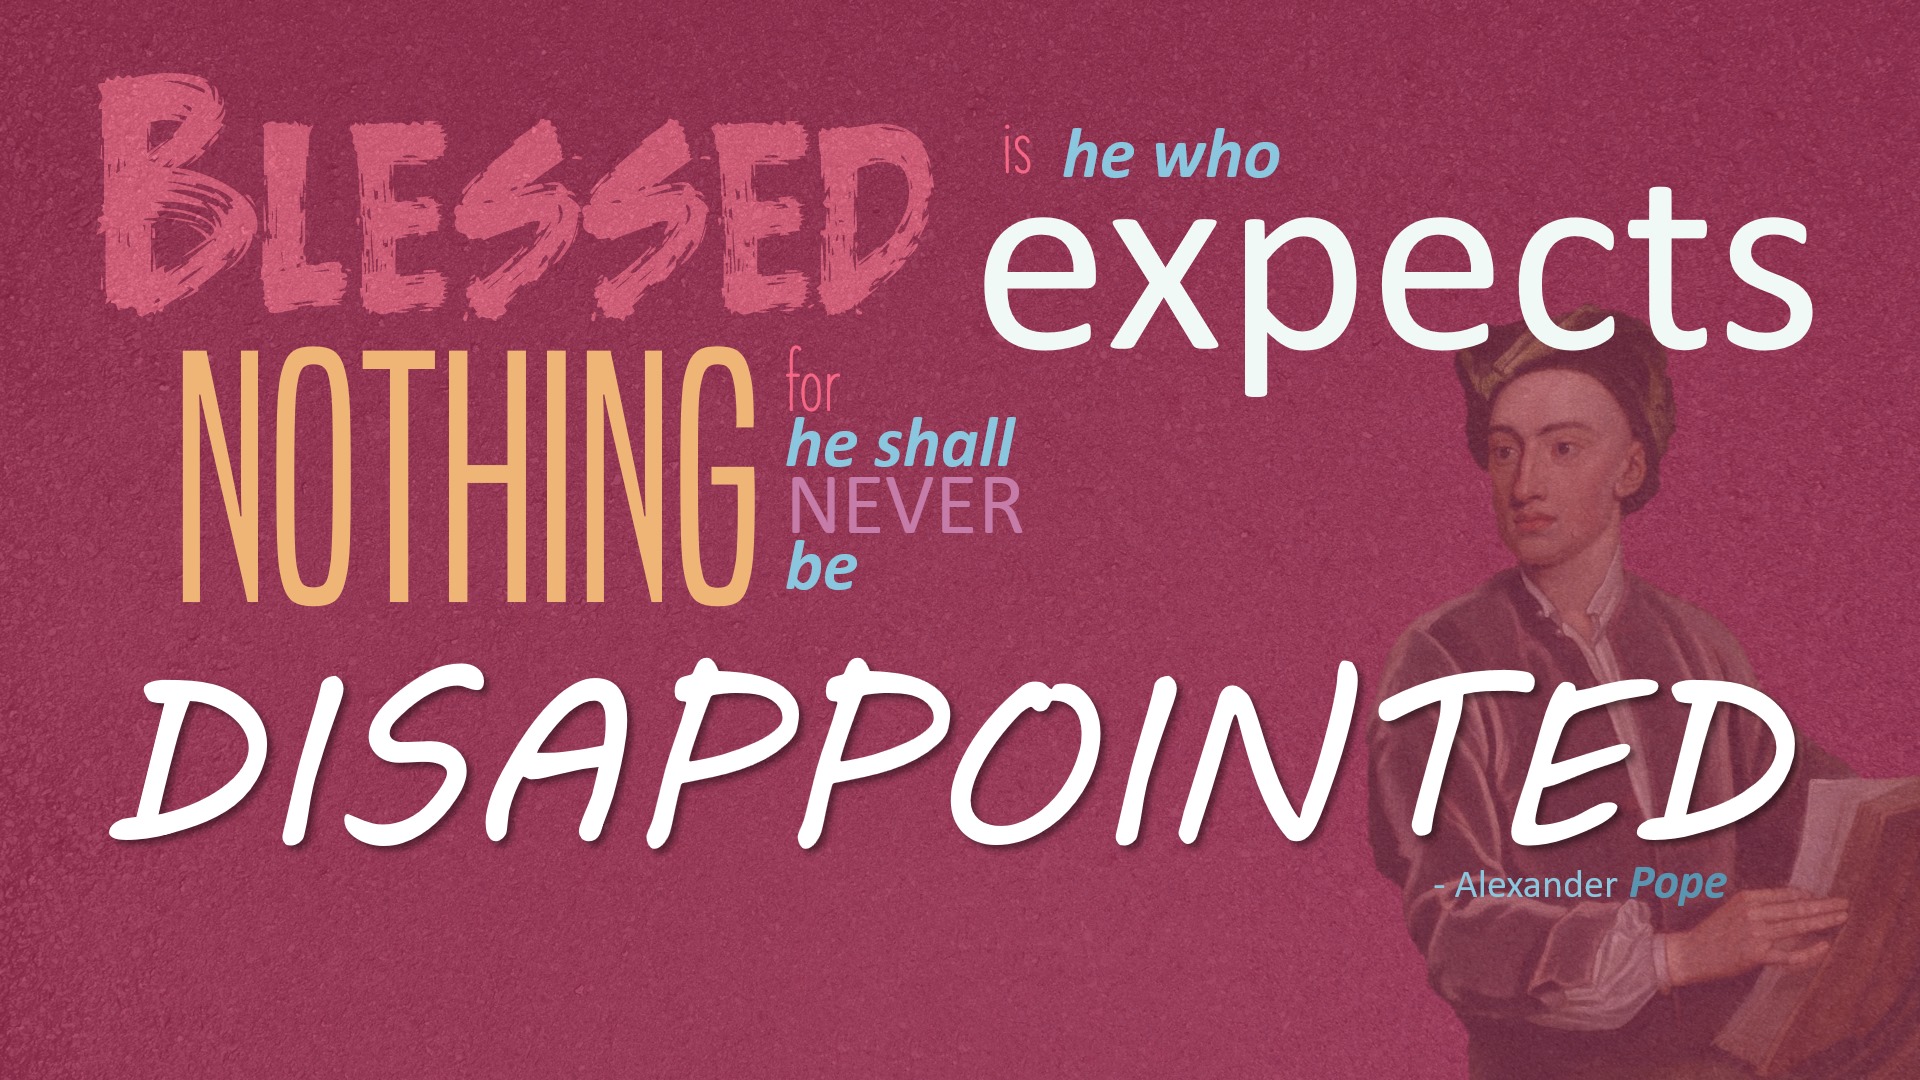 “Blessed is he who expects nothing, for he shall never be disappointed.” – Alexander Pope